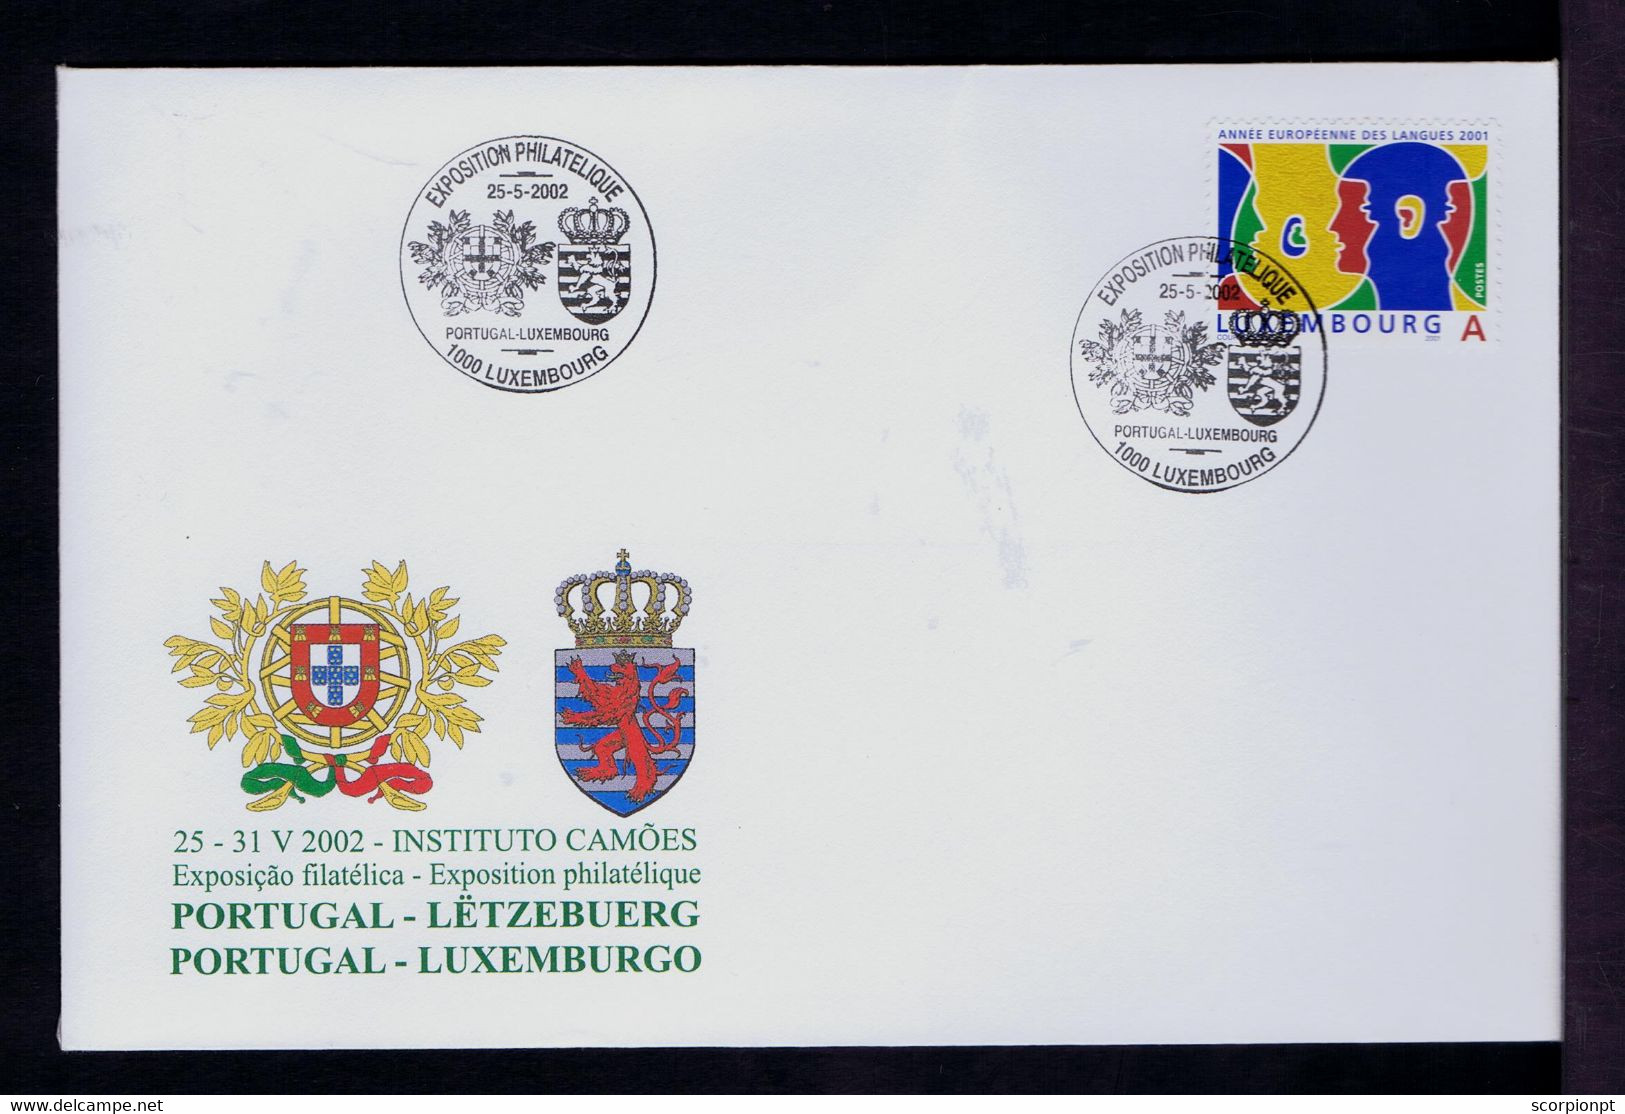 Portugal Luxembourg Brasons Coat Of Arms 2002 Philatelic Exhibition Heraldic Sp7529 - Hologrammes